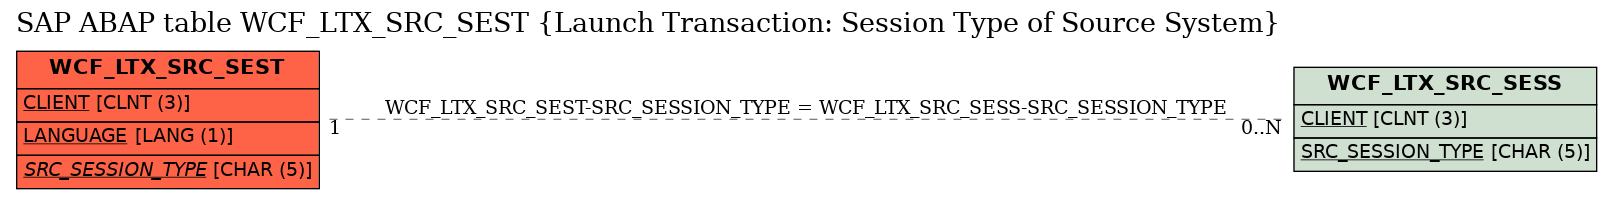 E-R Diagram for table WCF_LTX_SRC_SEST (Launch Transaction: Session Type of Source System)